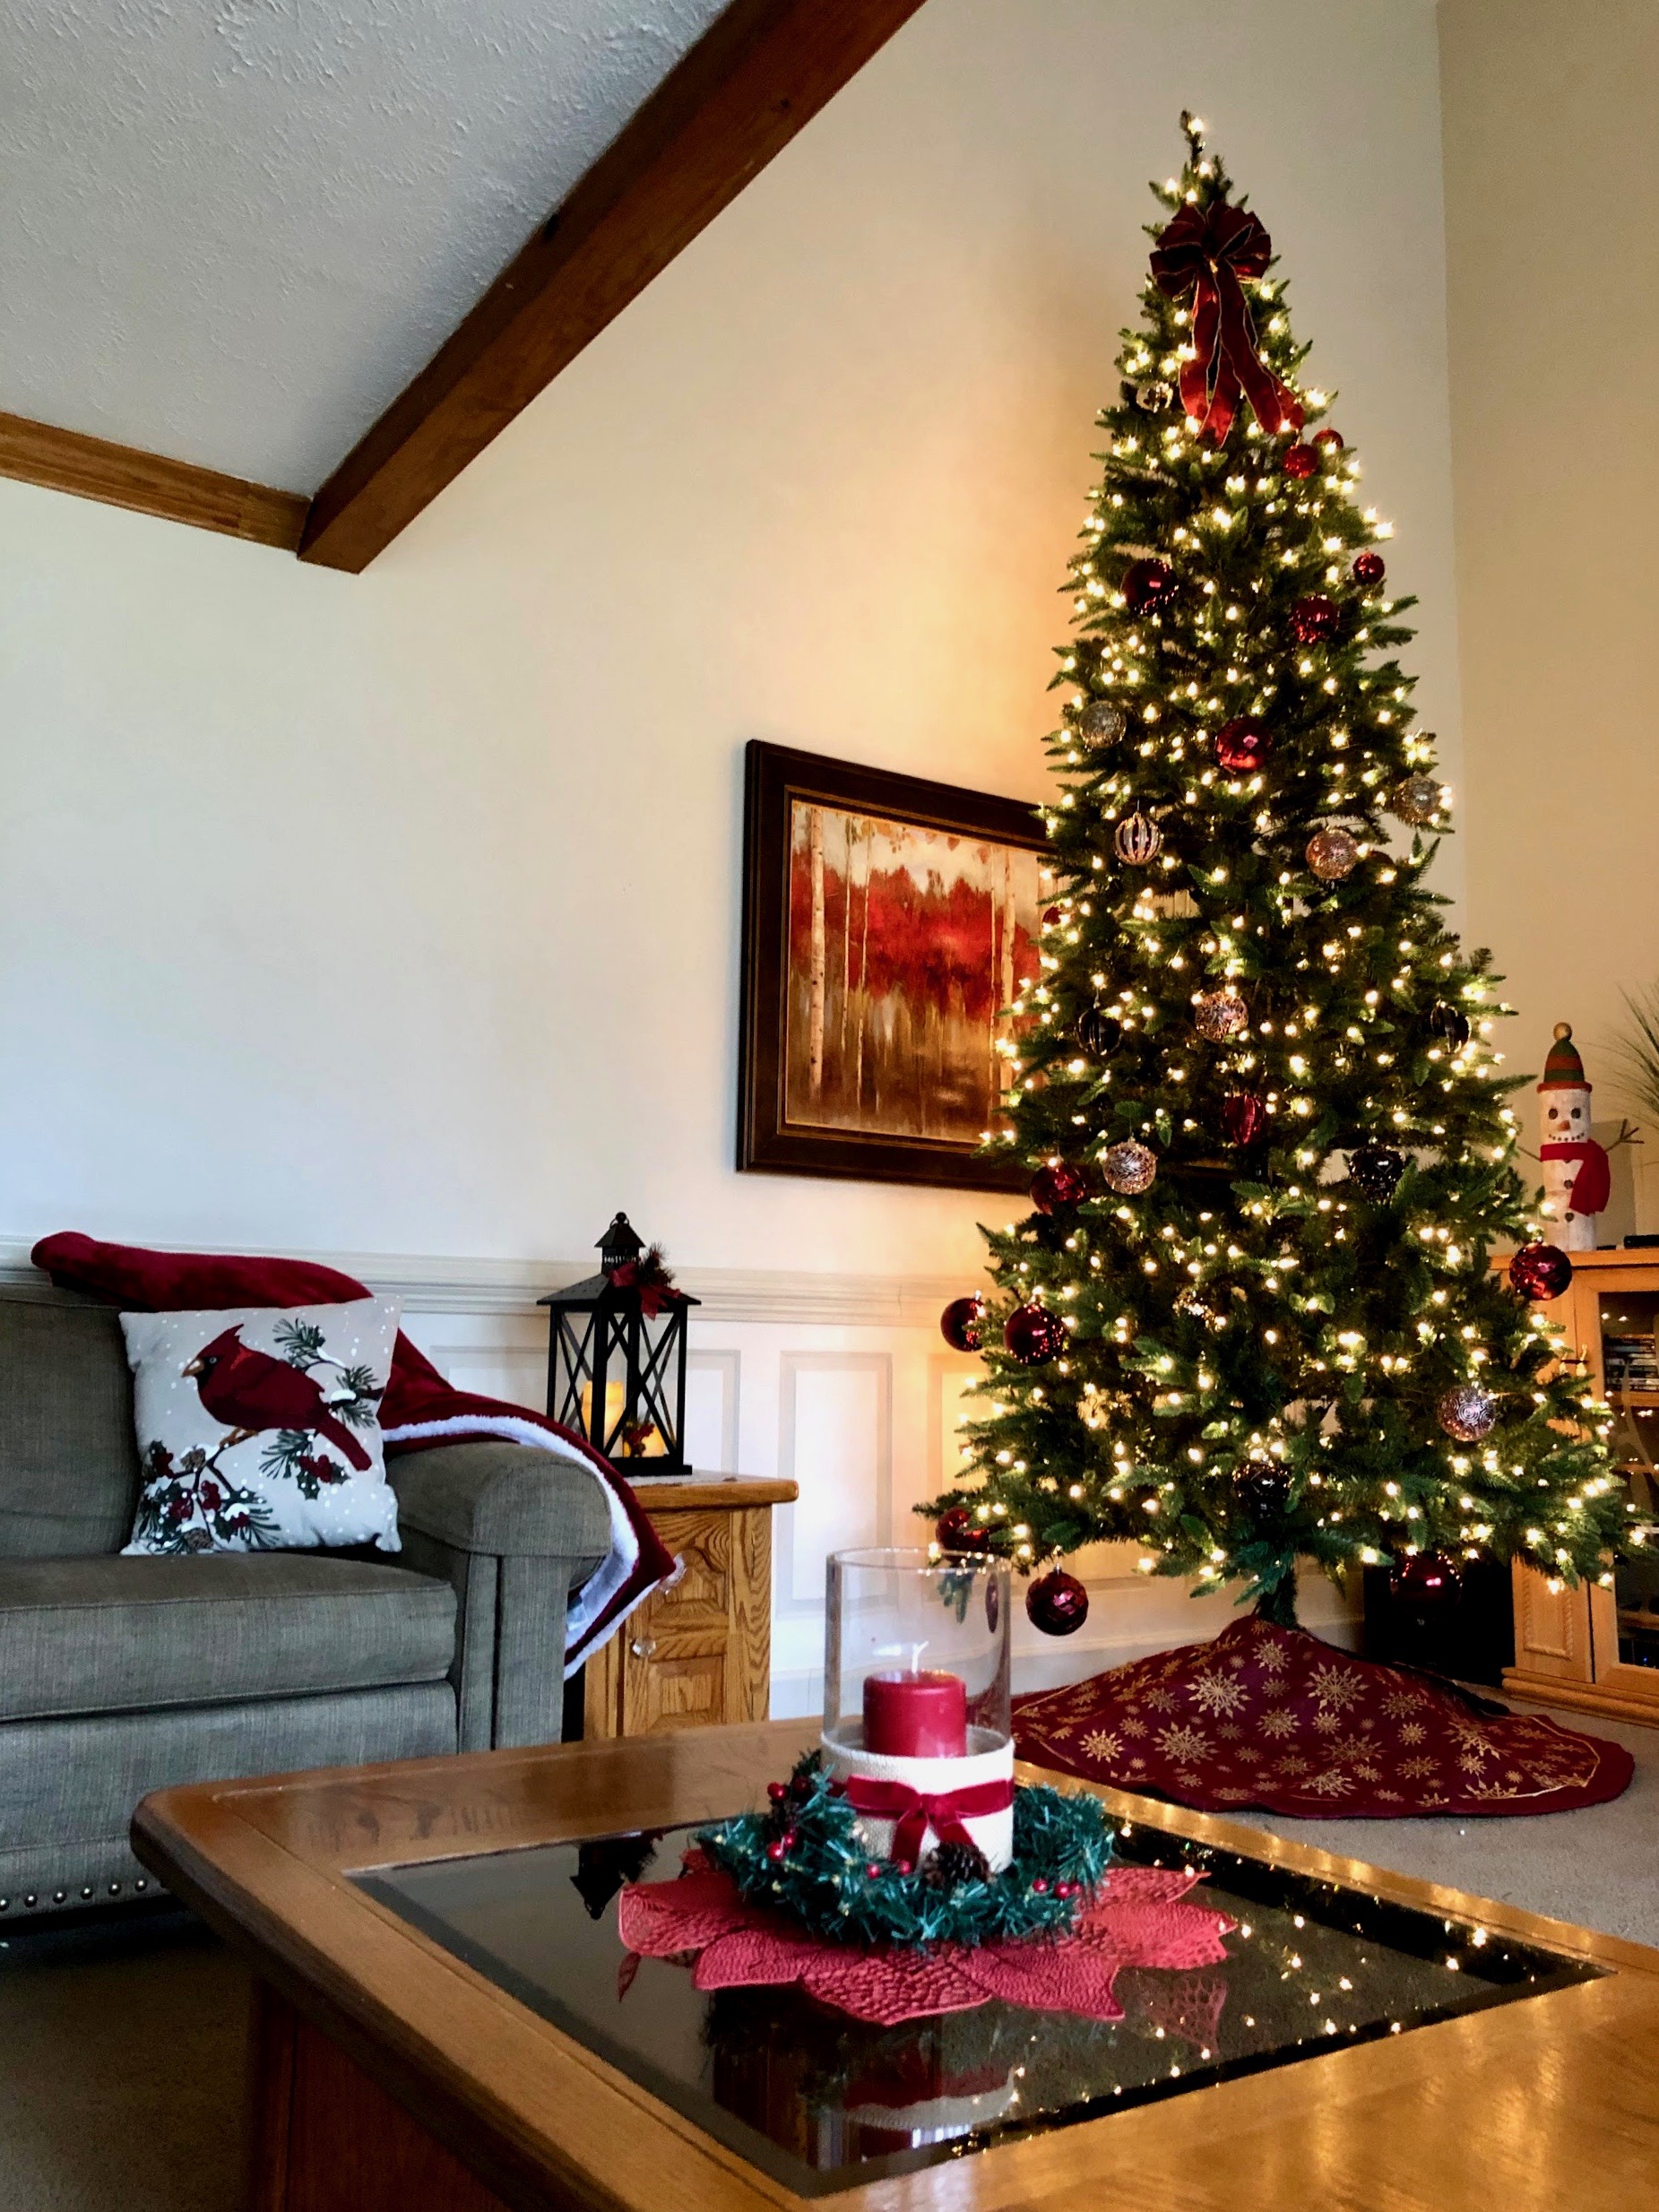 Consider having Christmas at the lake. We have the tree set up during December!